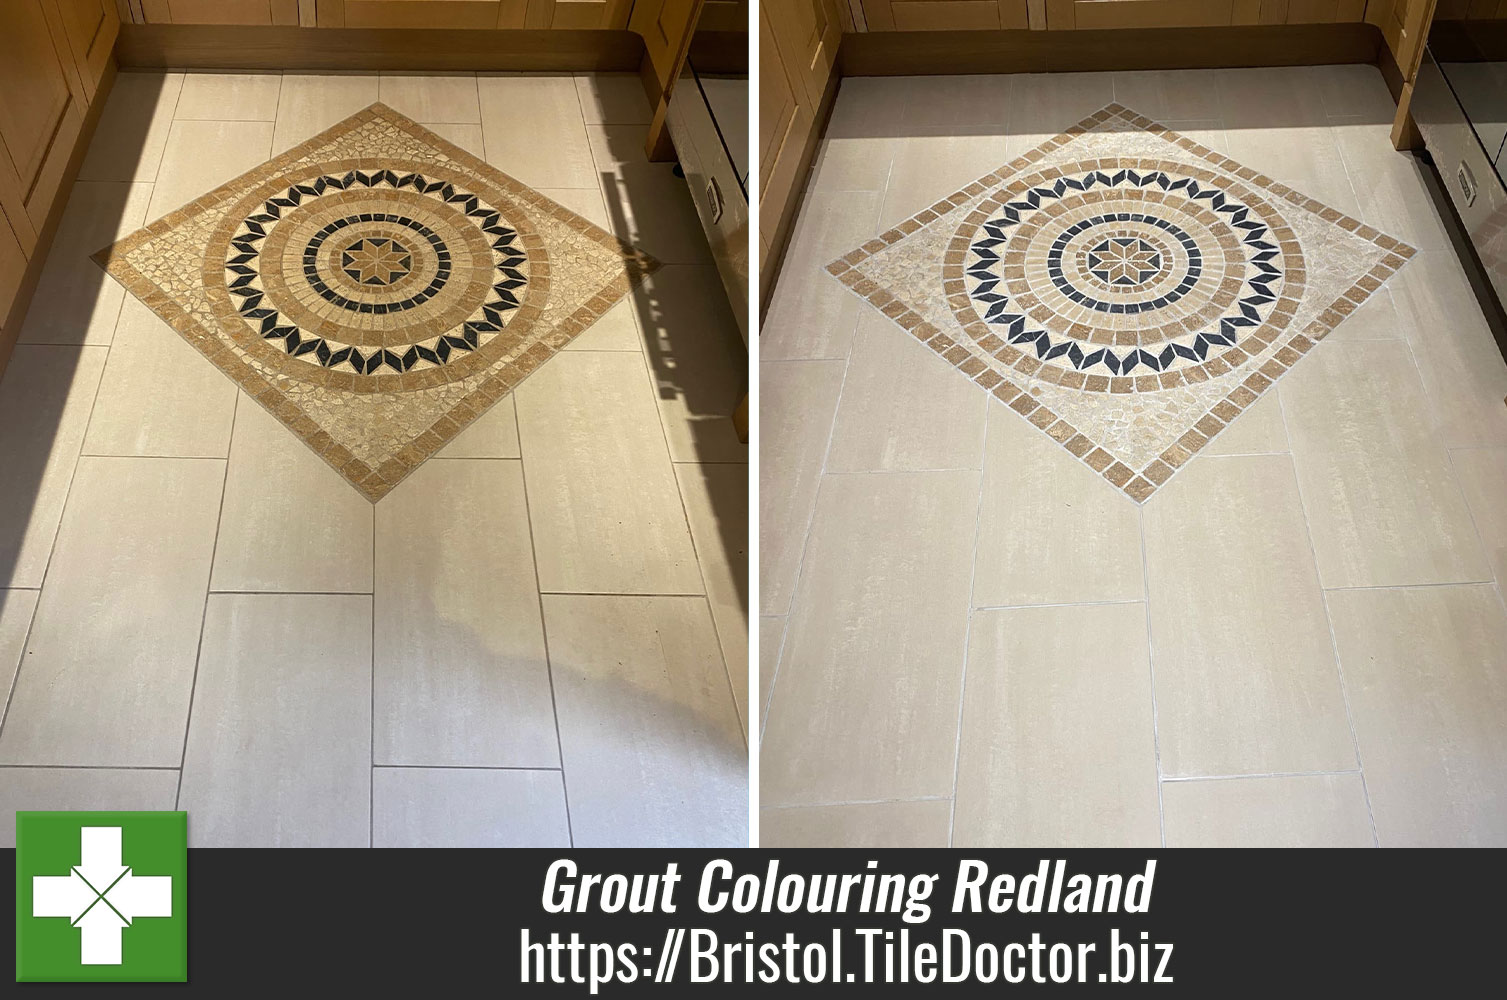 Grout Pre-Treat Cleaner used to Achieve a Superior Bond with Grout Colourant in Redland Bristol